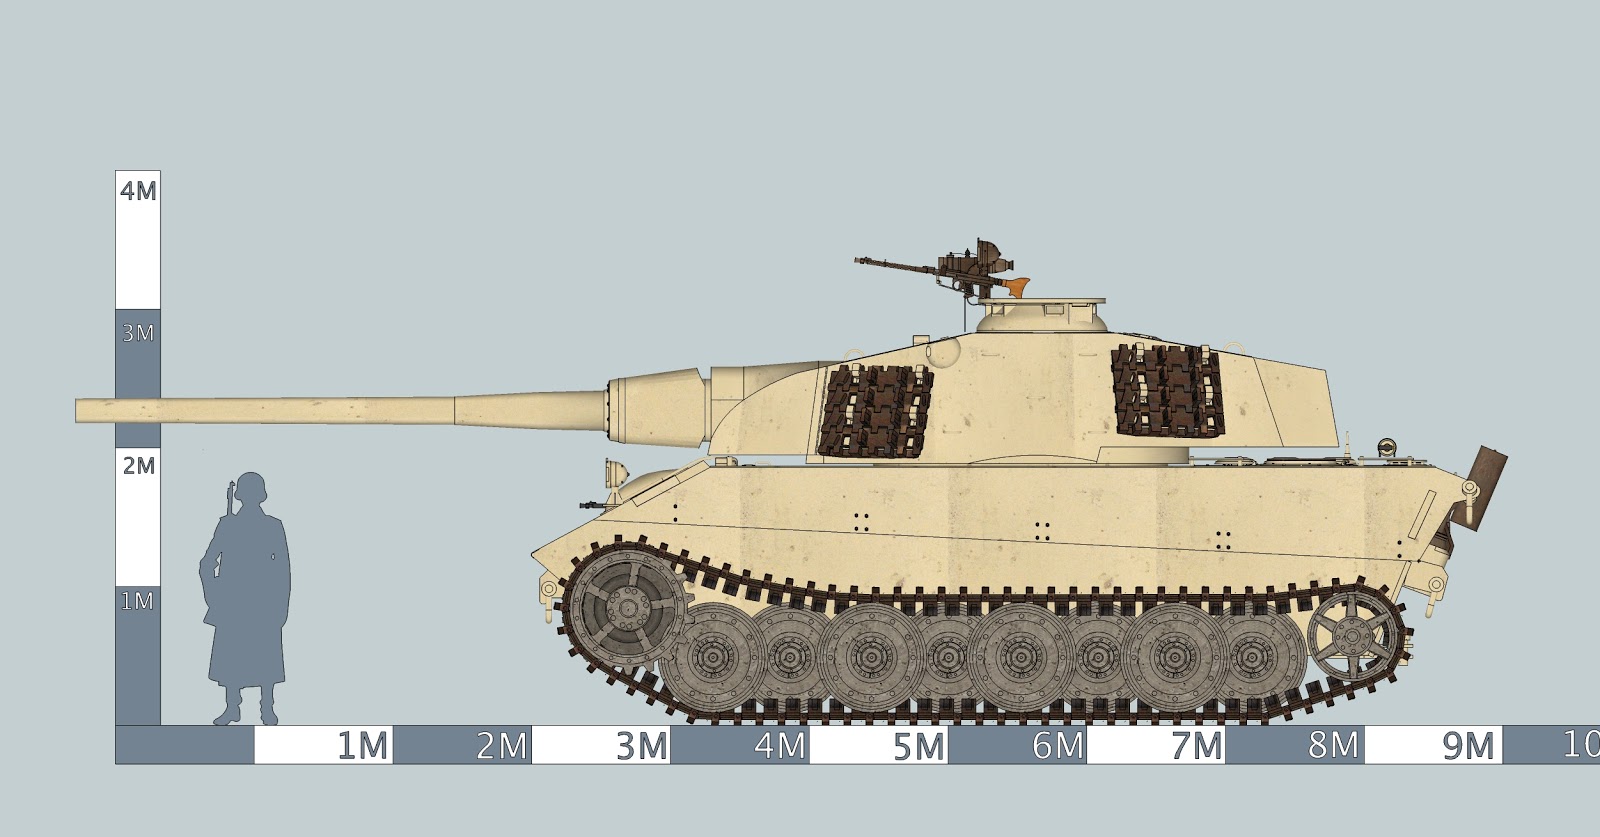 SketchUP Power 草圖力量: E75 II with 128mm Pak44 L/55